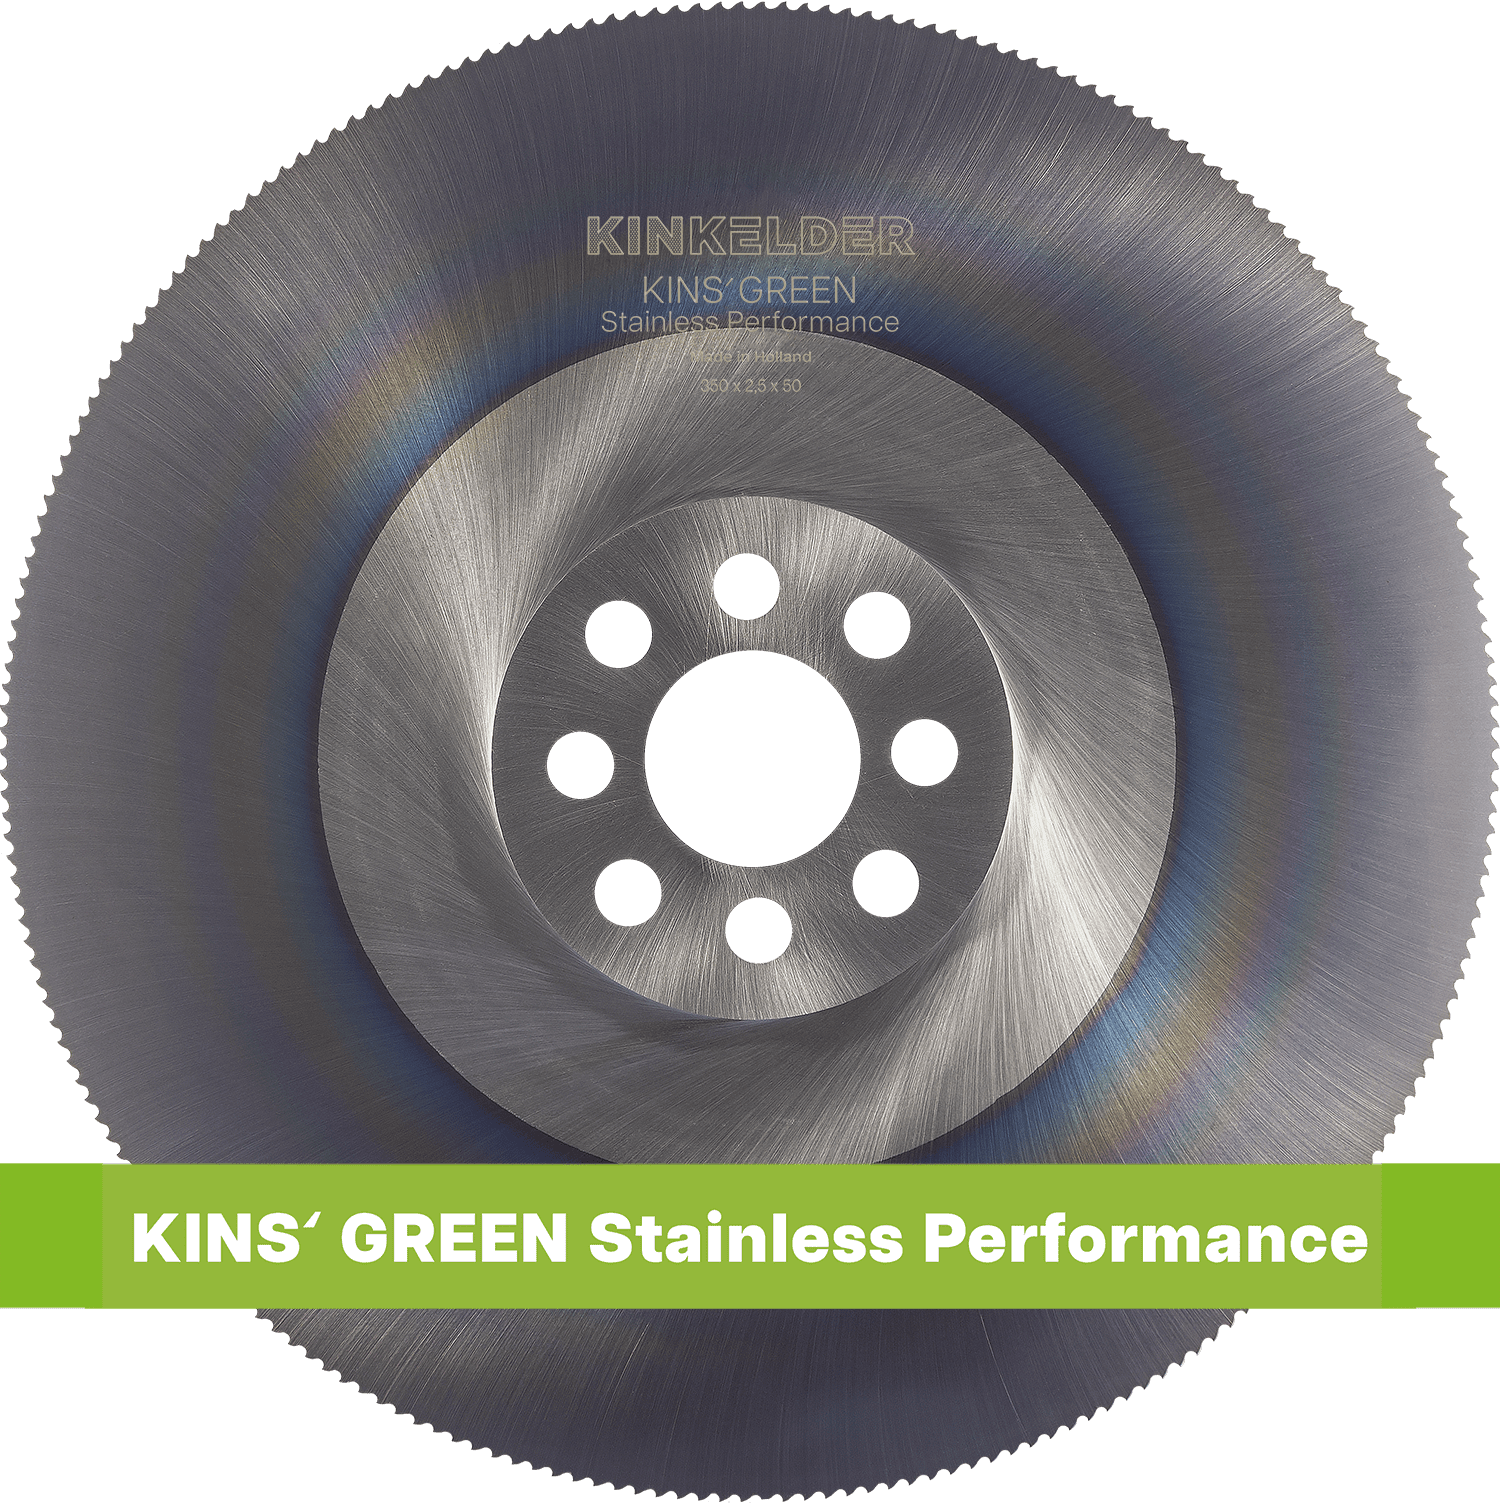 KINS‘ GREEN Stainless Performance